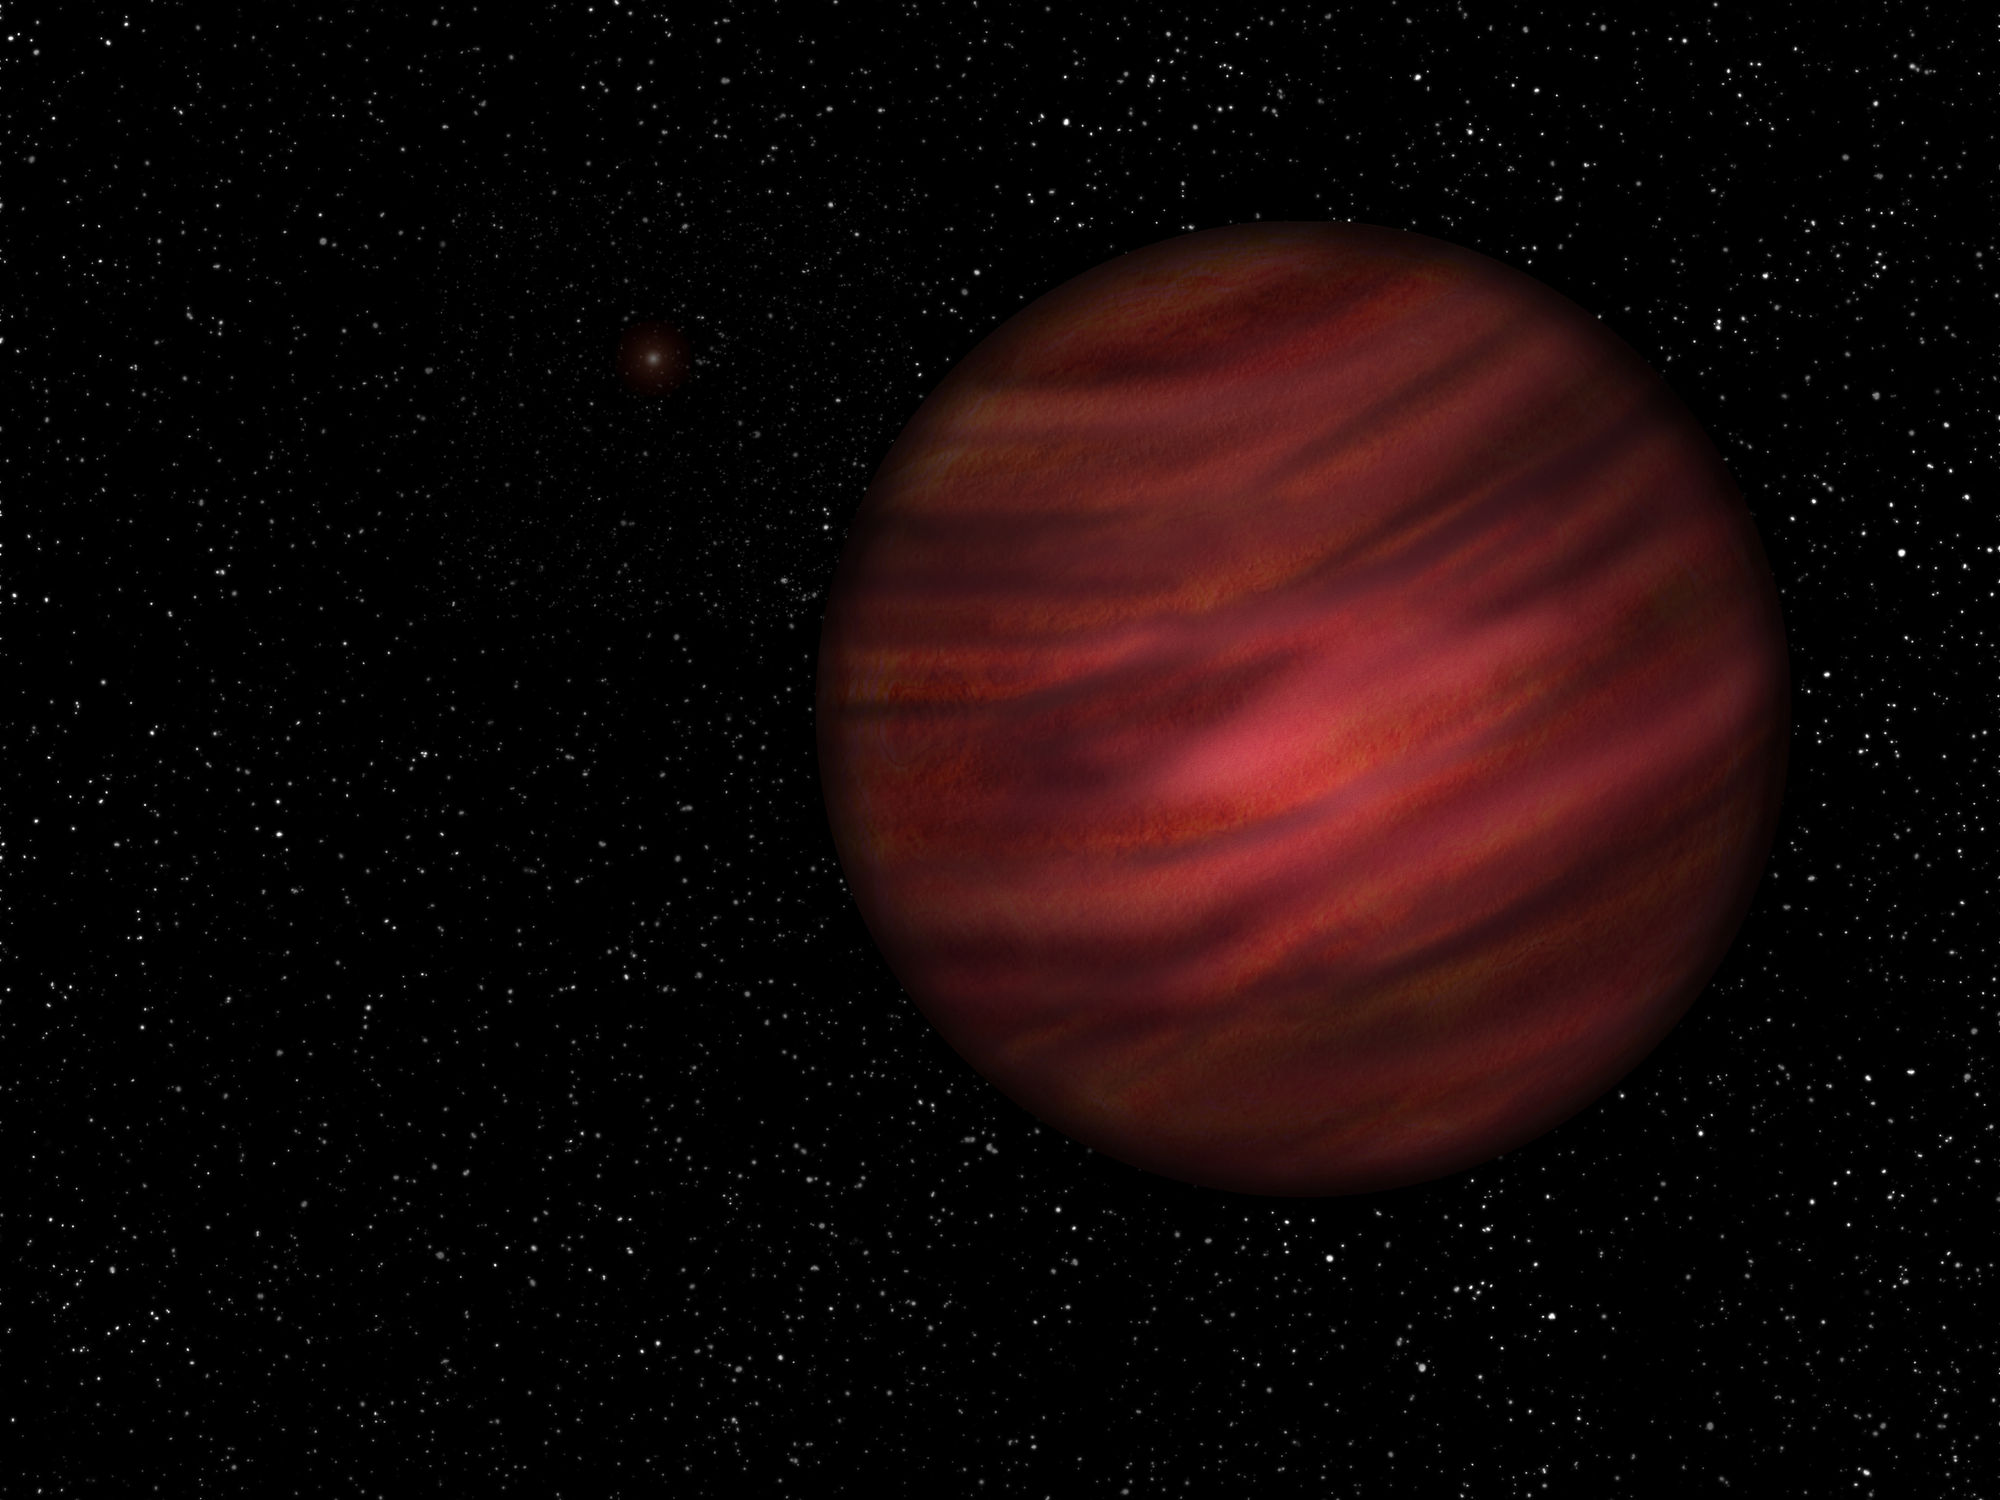 Astronomers have discovered an exoplanet with an orbital period of 27 000 years